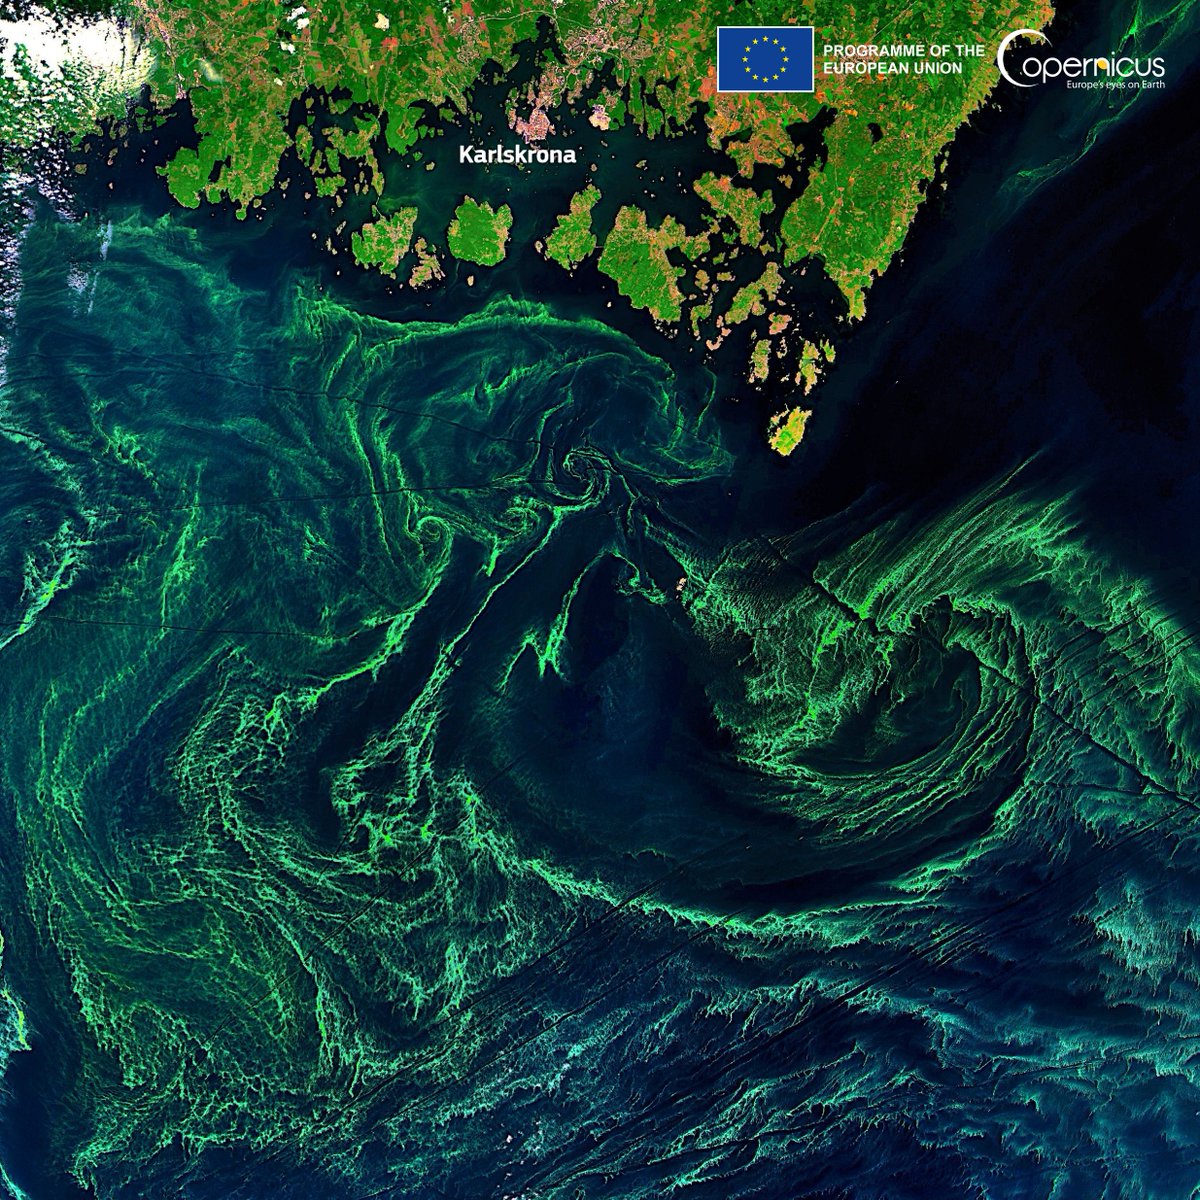 #EUSpace 🛰️🇪🇺 for #EUGreenDeal #Copernicus 🛰️🇪🇺 supports the #BlueEconomy It will help us to meet the EU's environmental and climate goals by informing 💧assessments of water quality 🎣mapping of fishing zones 🌊monitoring of algal blooms More at👇 defence-industry-space.ec.europa.eu/eu-space/coper…